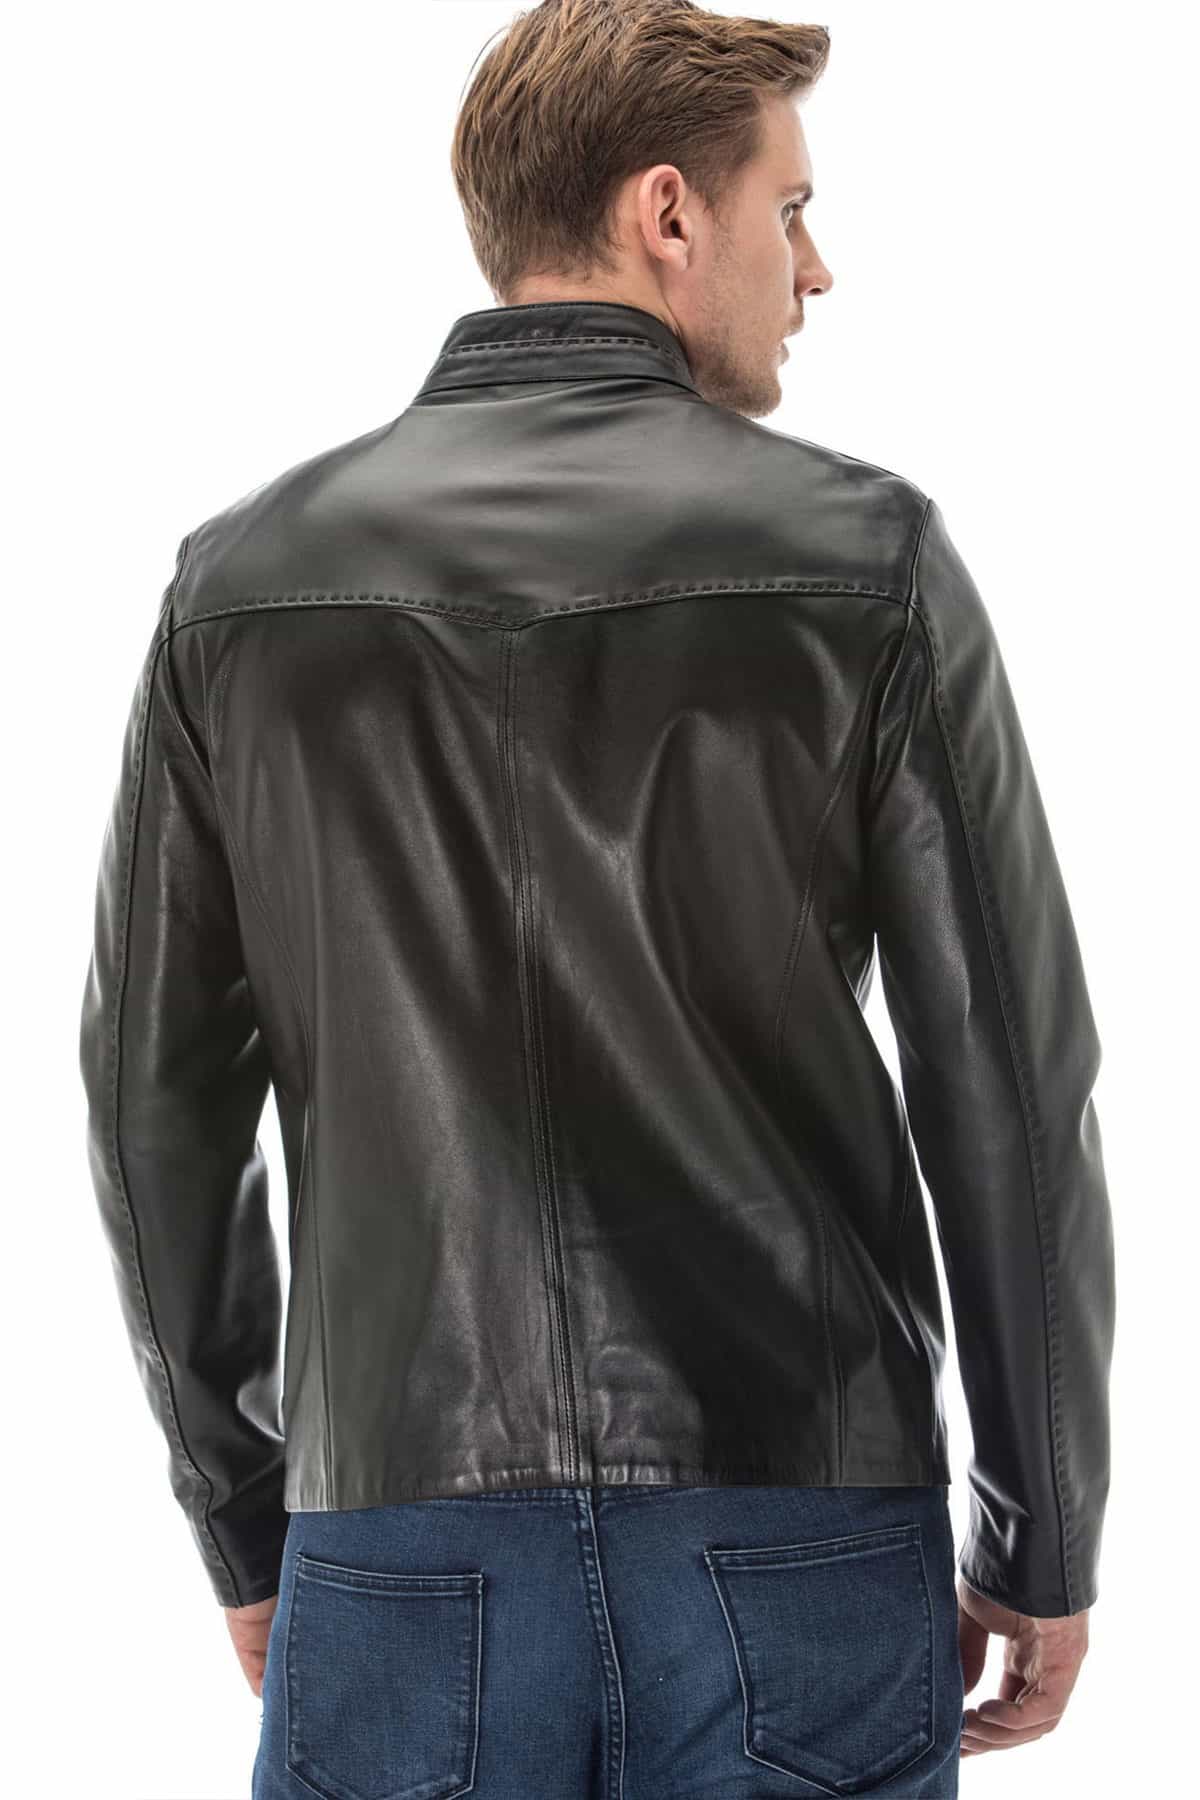 Mens Black Urbanite Casual Leather Jacket w Shirt Style Collar one L Left! 